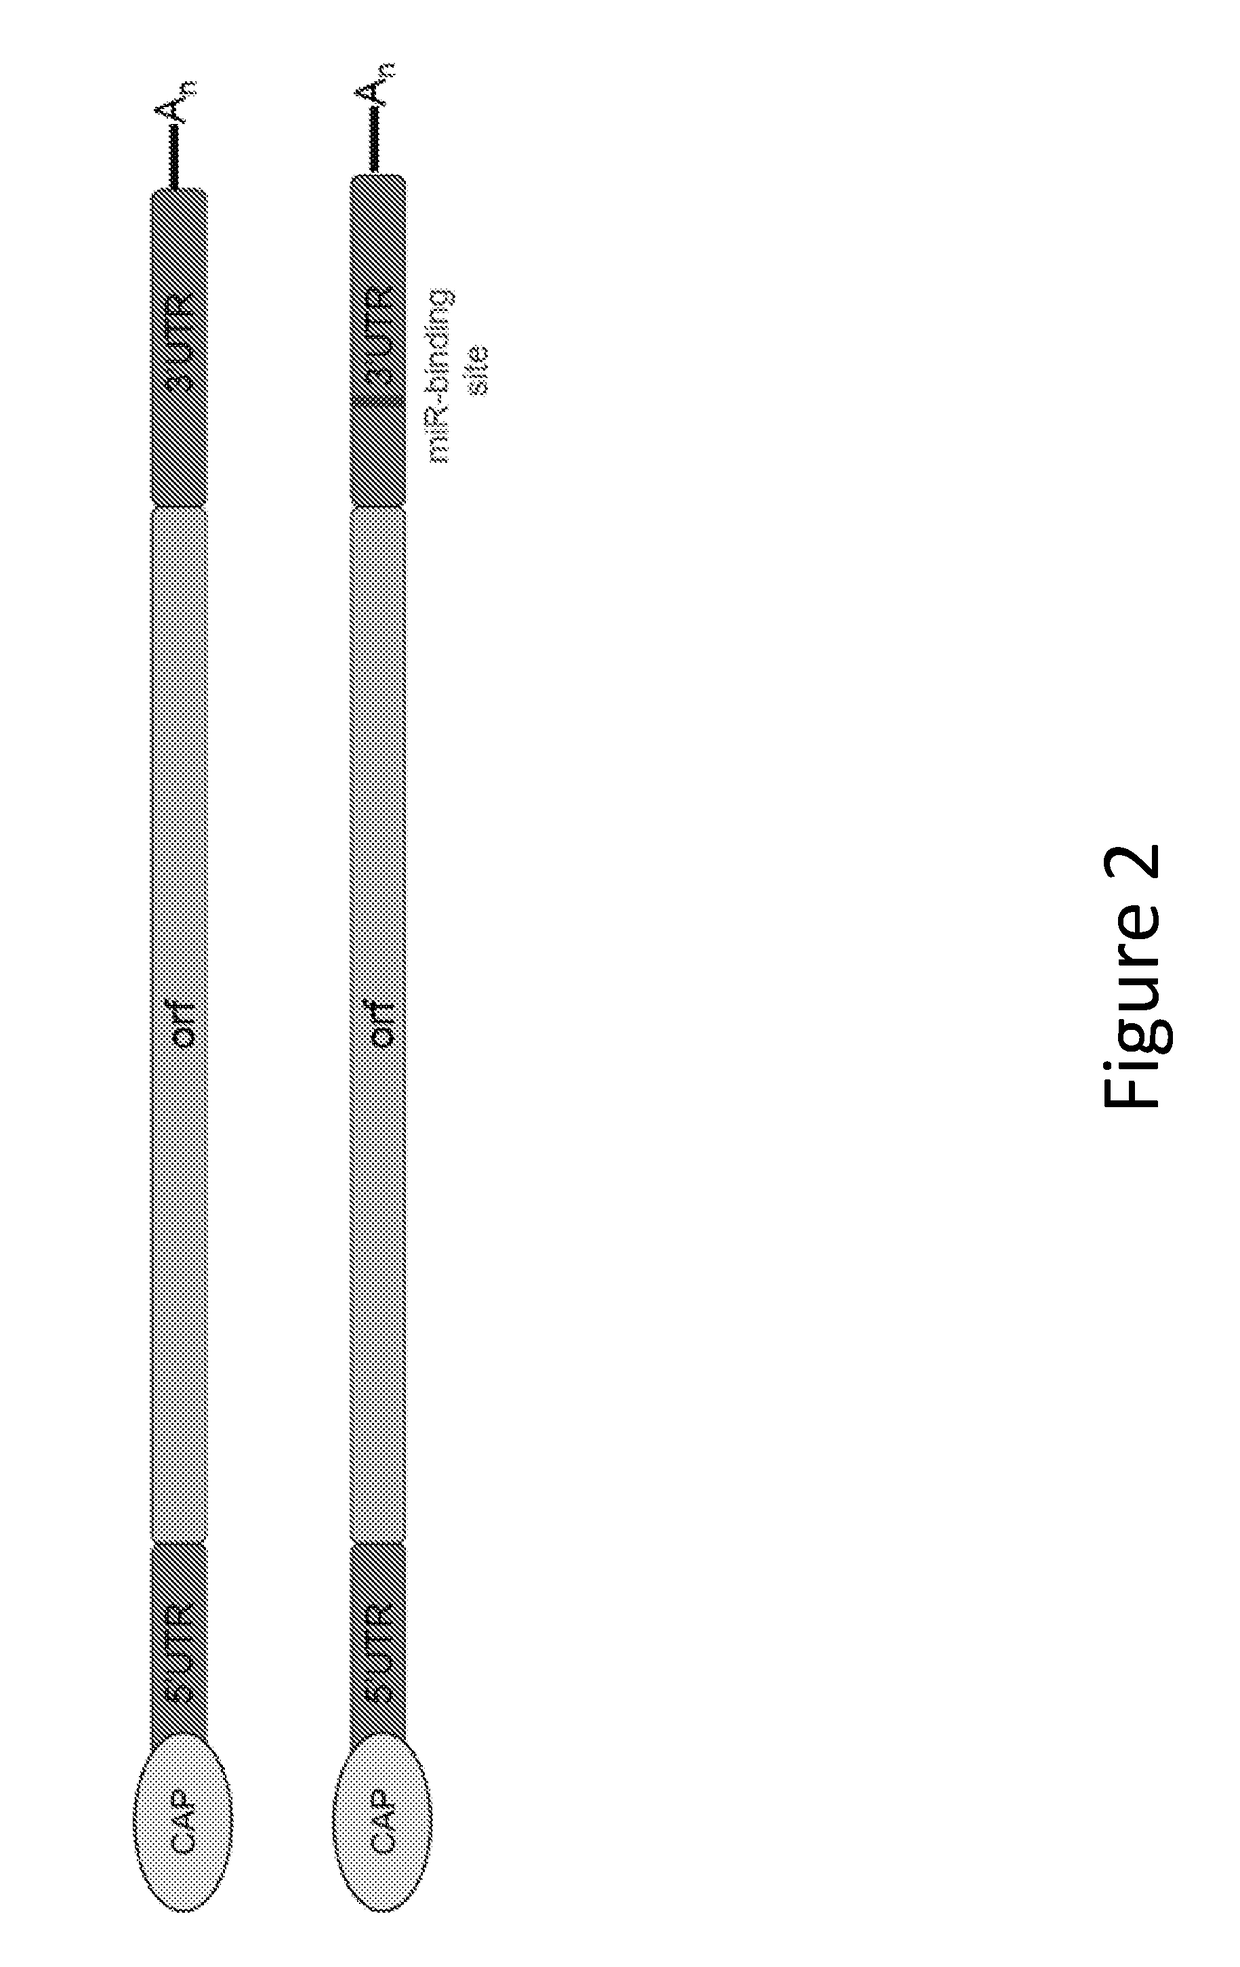 Methods for therapeutic administration of messenger ribonucleic acid drugs